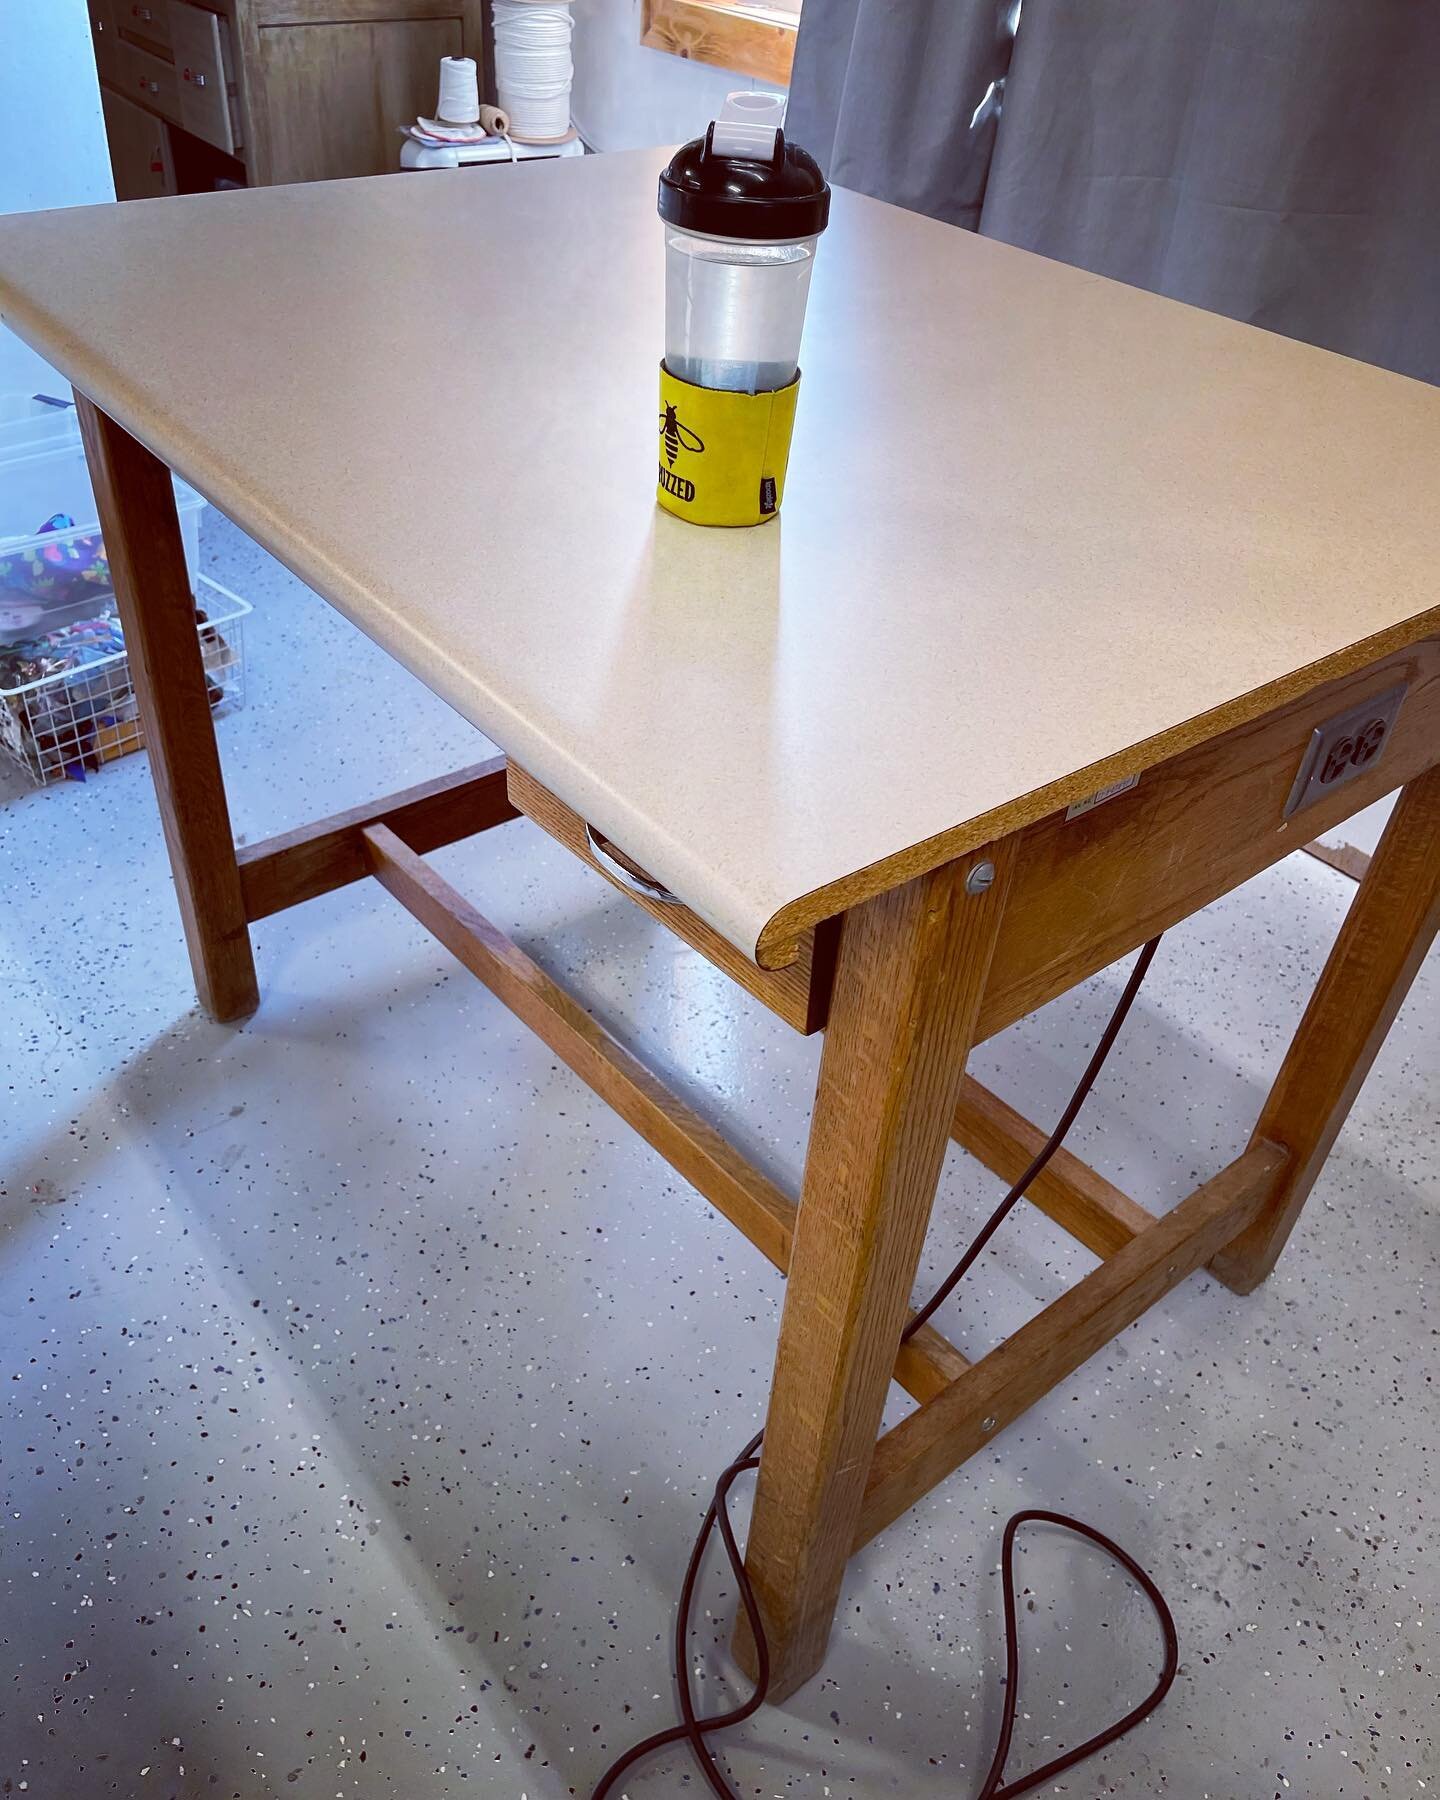 This was my project yesterday afternoon; clean off my old drafting table. This is a vintage drafting table that I got from a tech school sale. The top is a piece of leftover countertop. But, I&rsquo;ve had this for over 30 years, using it in my sewin